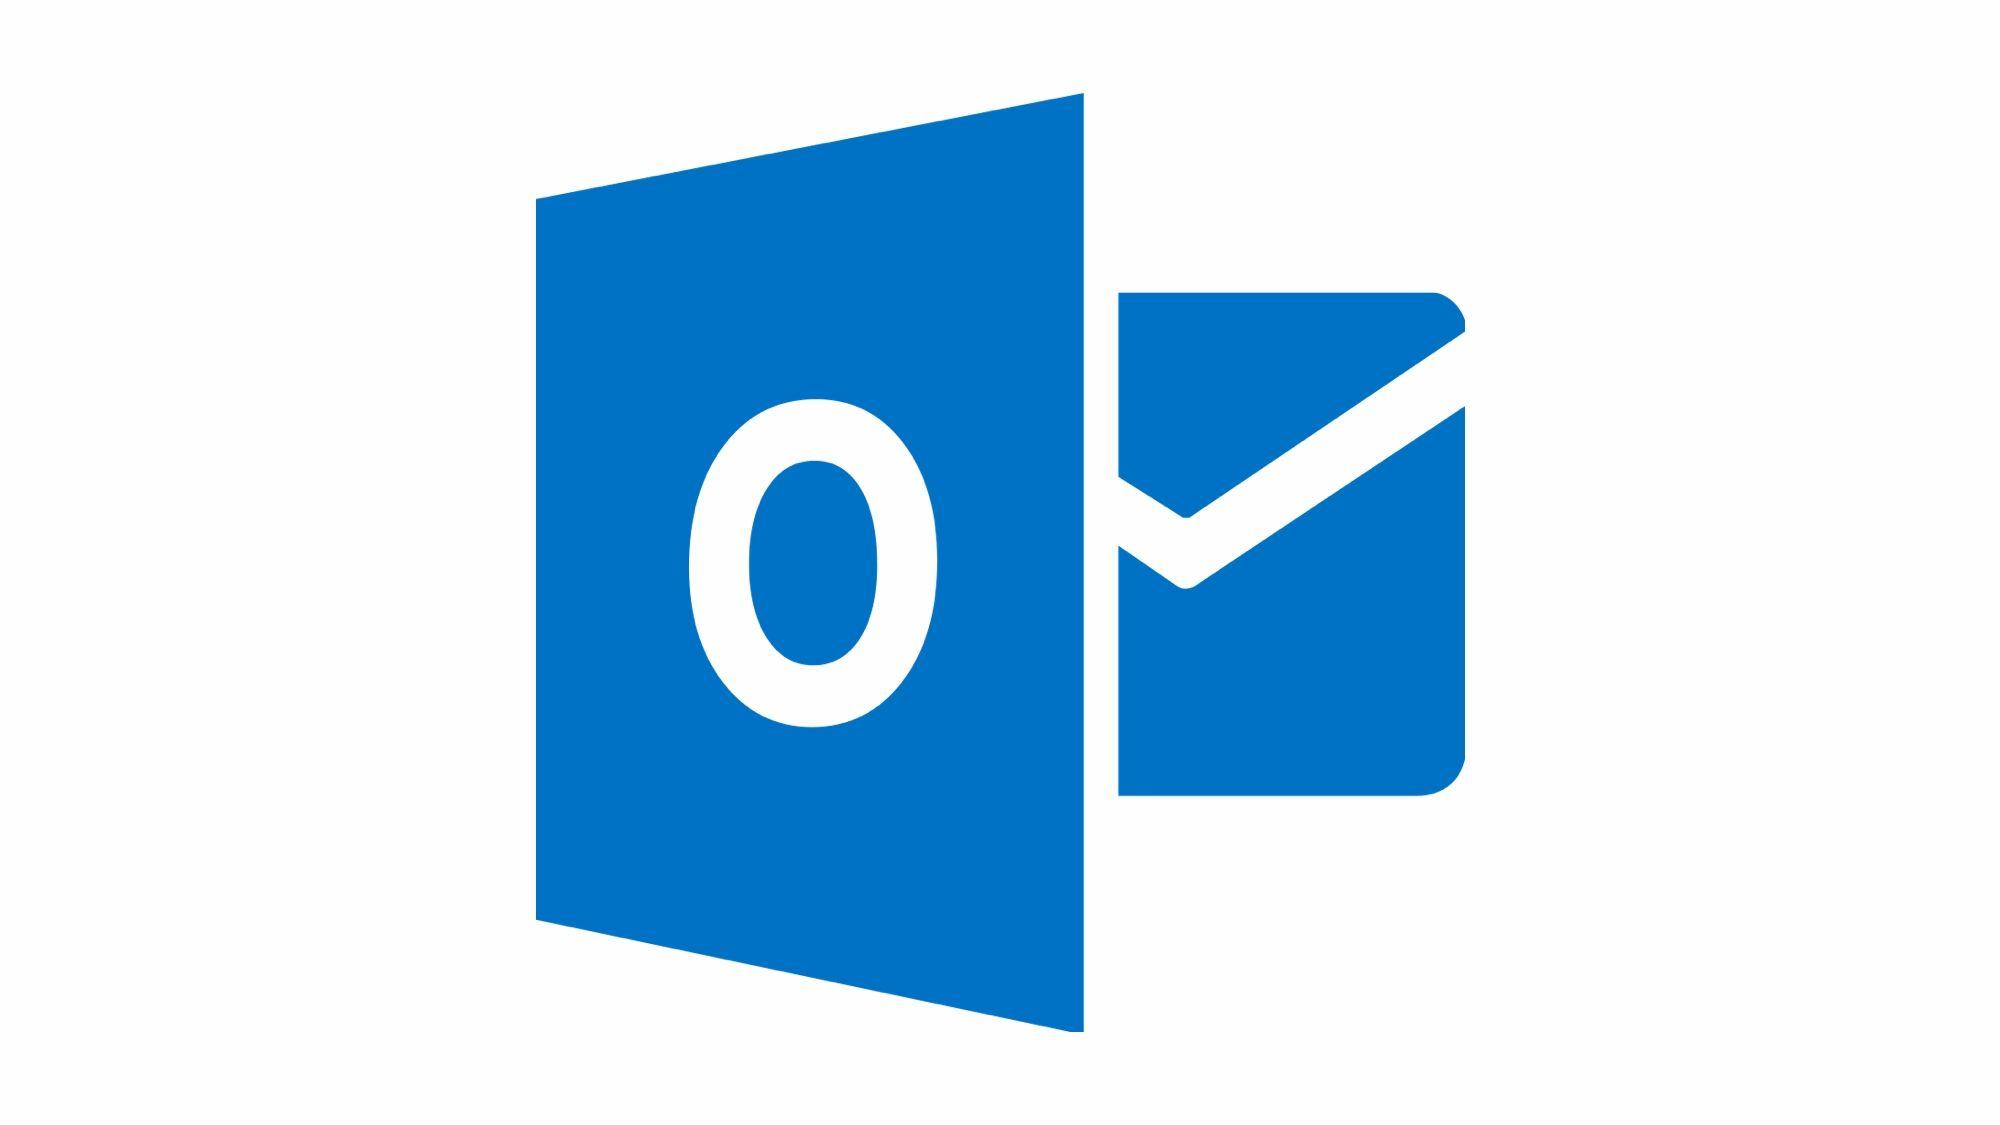 Outlook Transparent Logo - How to encrypt emails in Outlook